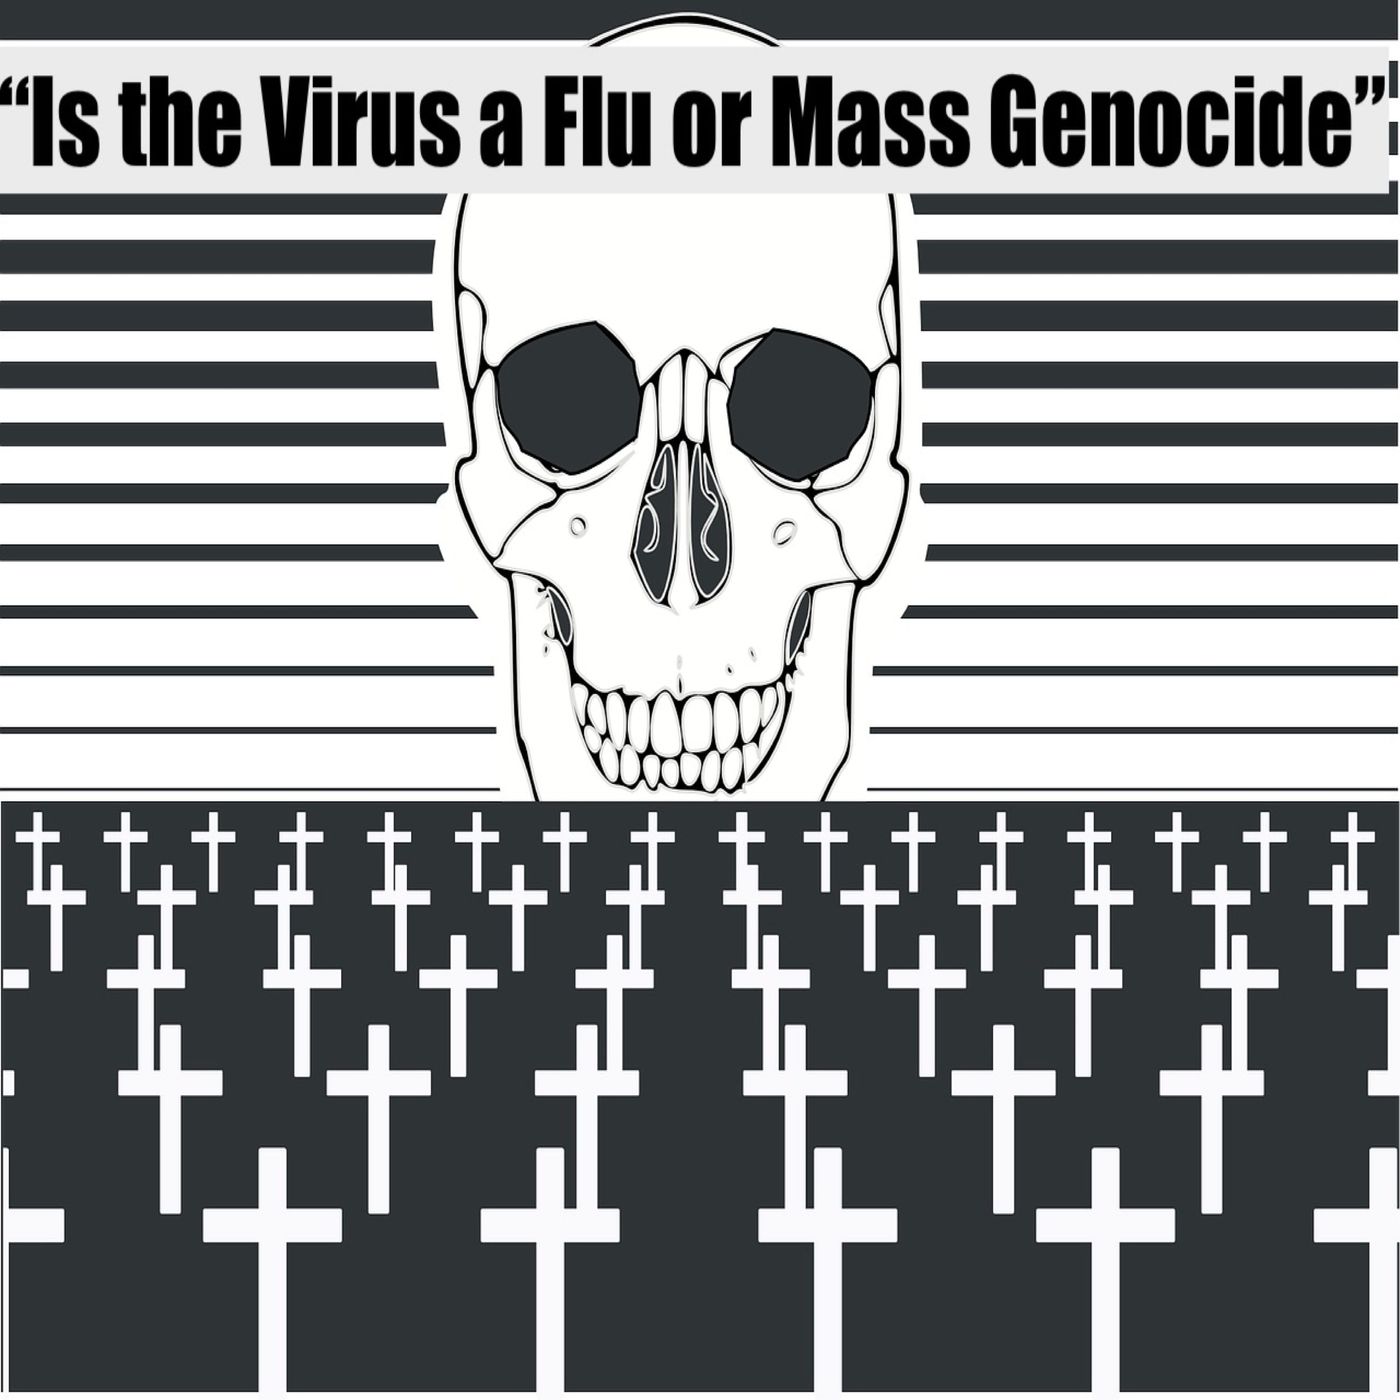 Ep 61 "Is the Virus just a Flu or Mass Genocide"